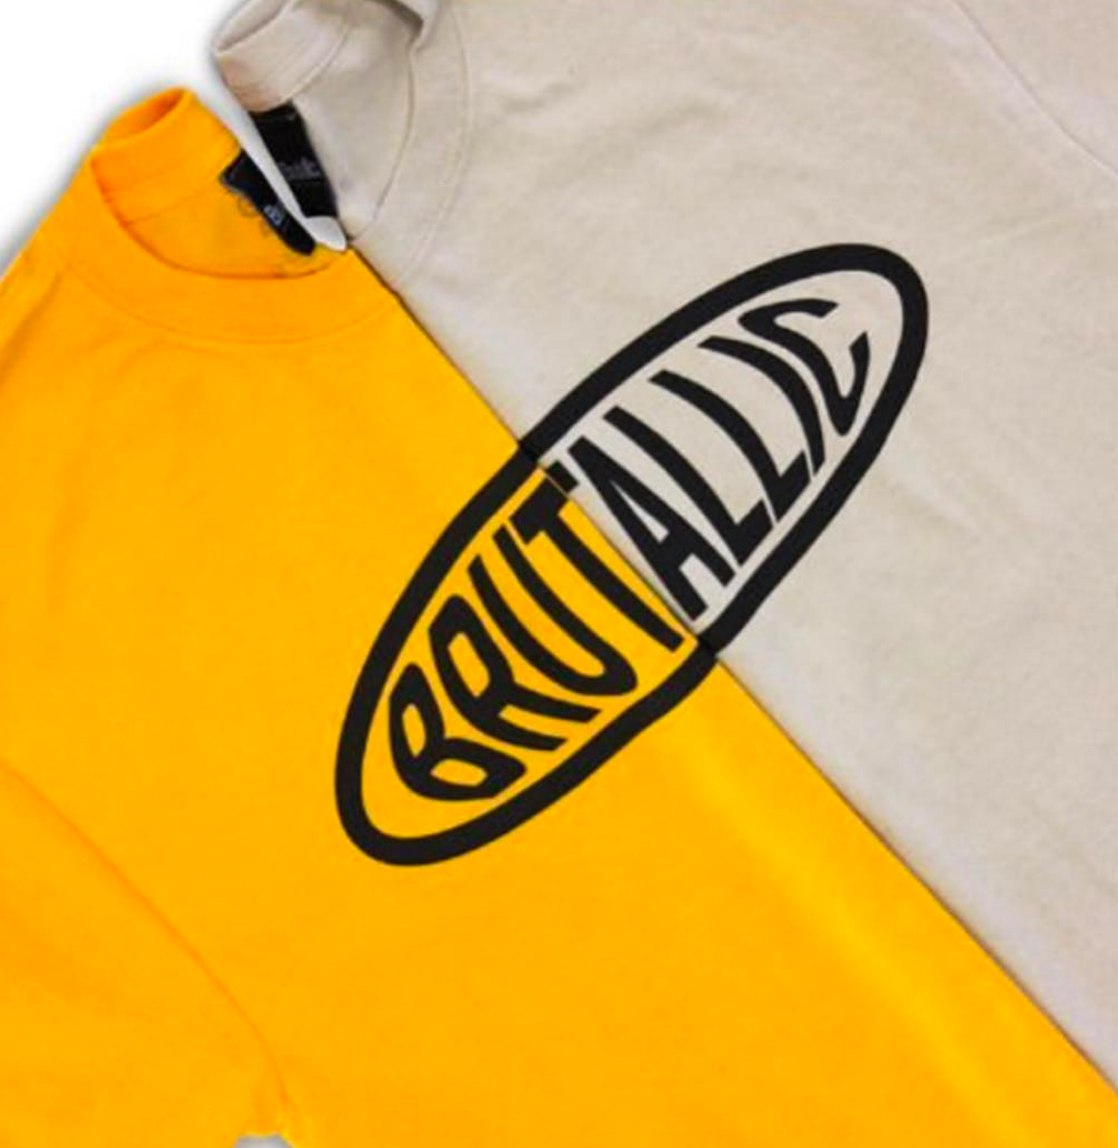 Brutallic Streetwear bubble tea tshirt with oval front logo, and buddha on the back, tan beige khaki color and mustard yellow color shirt